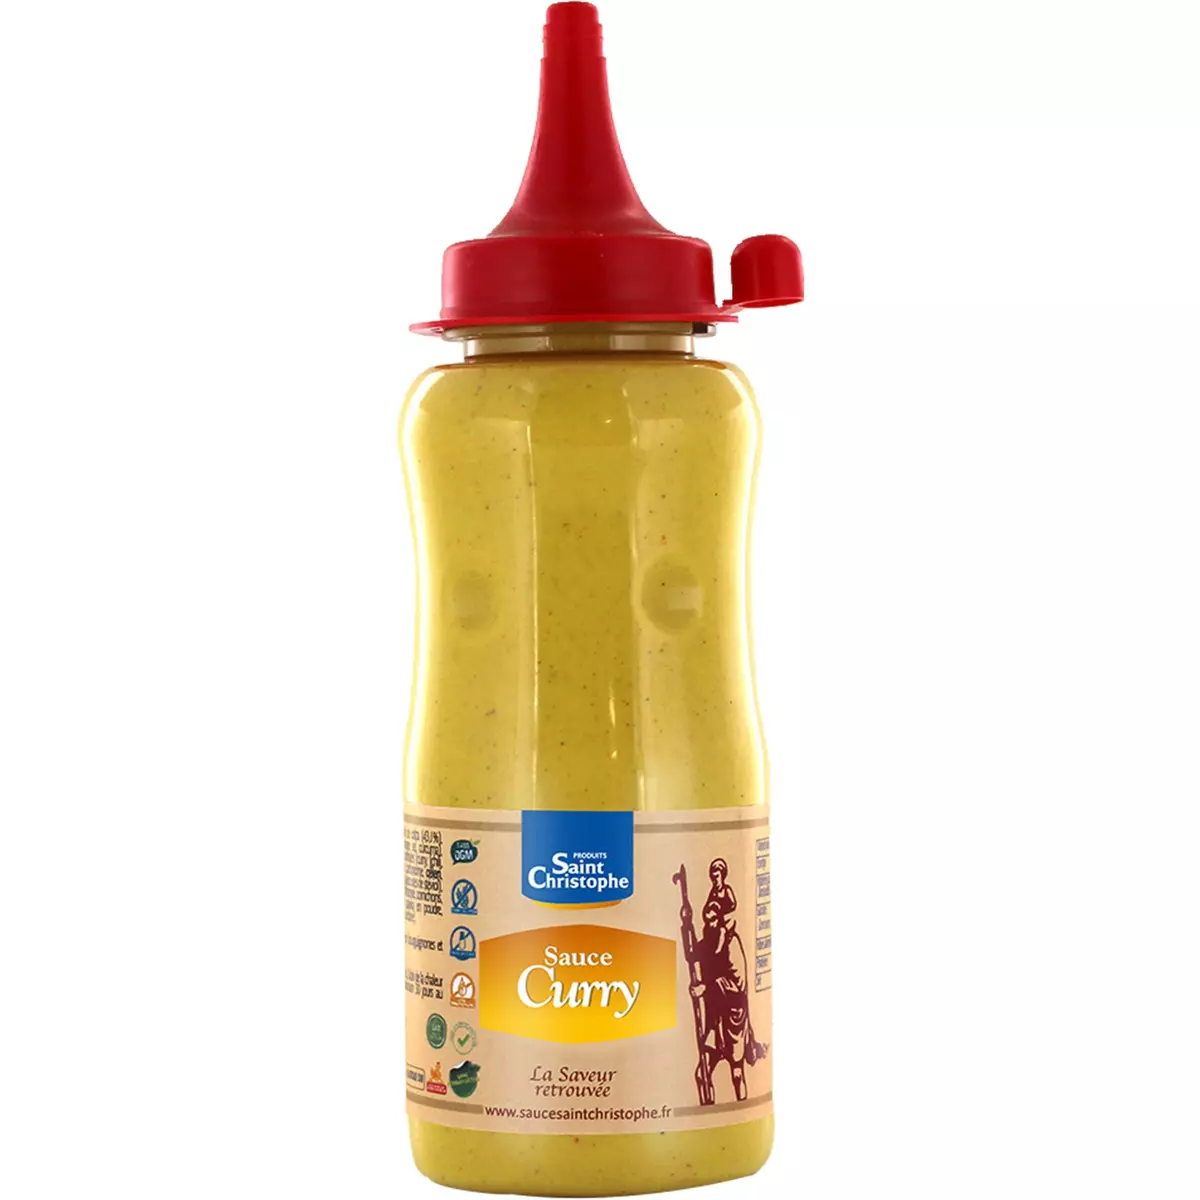 ST CHRISTOPHE Sauce curry 250g